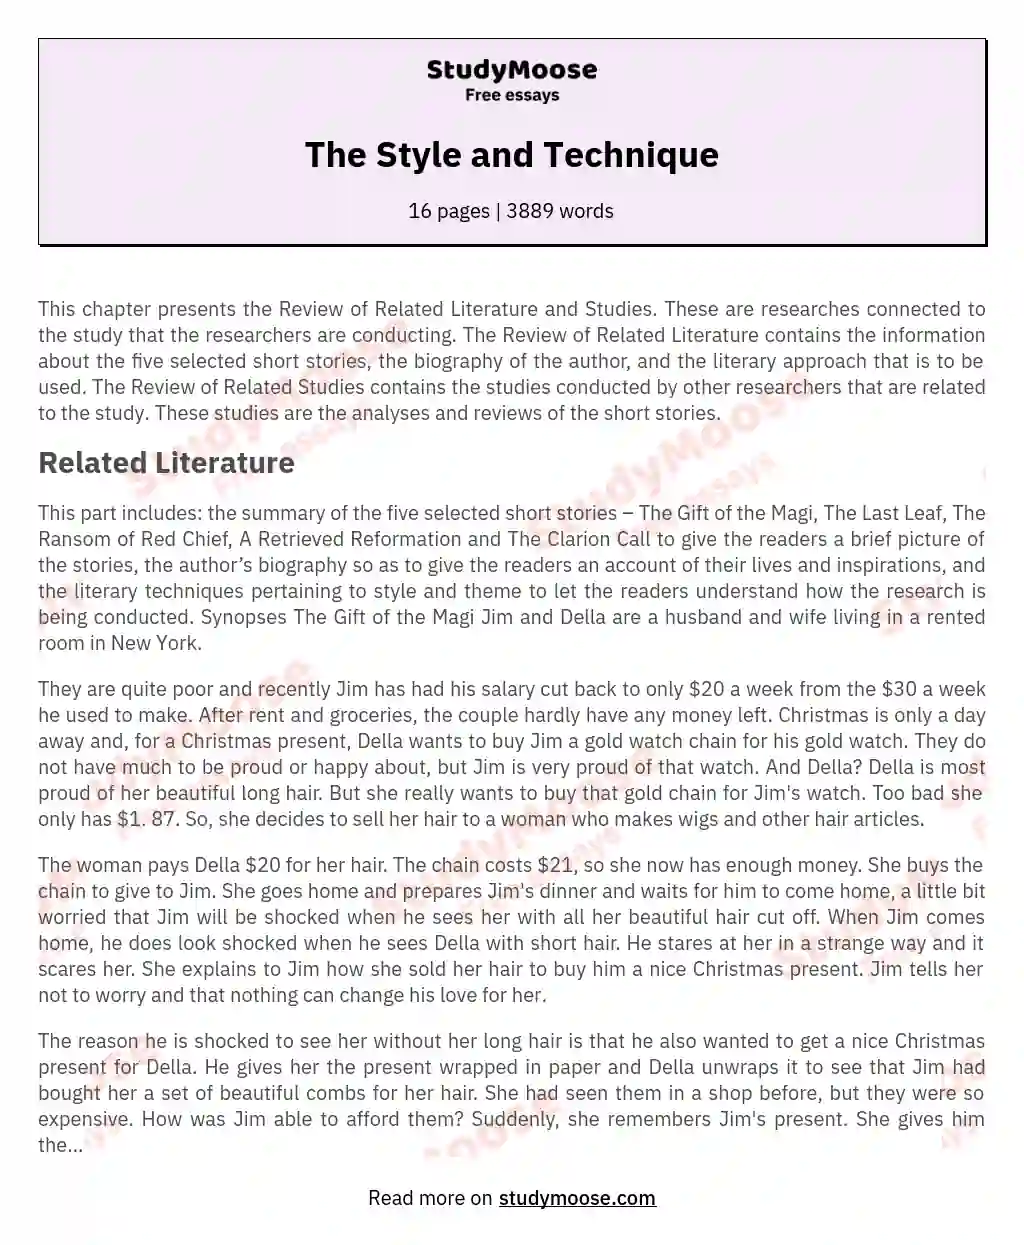 The Style and Technique essay